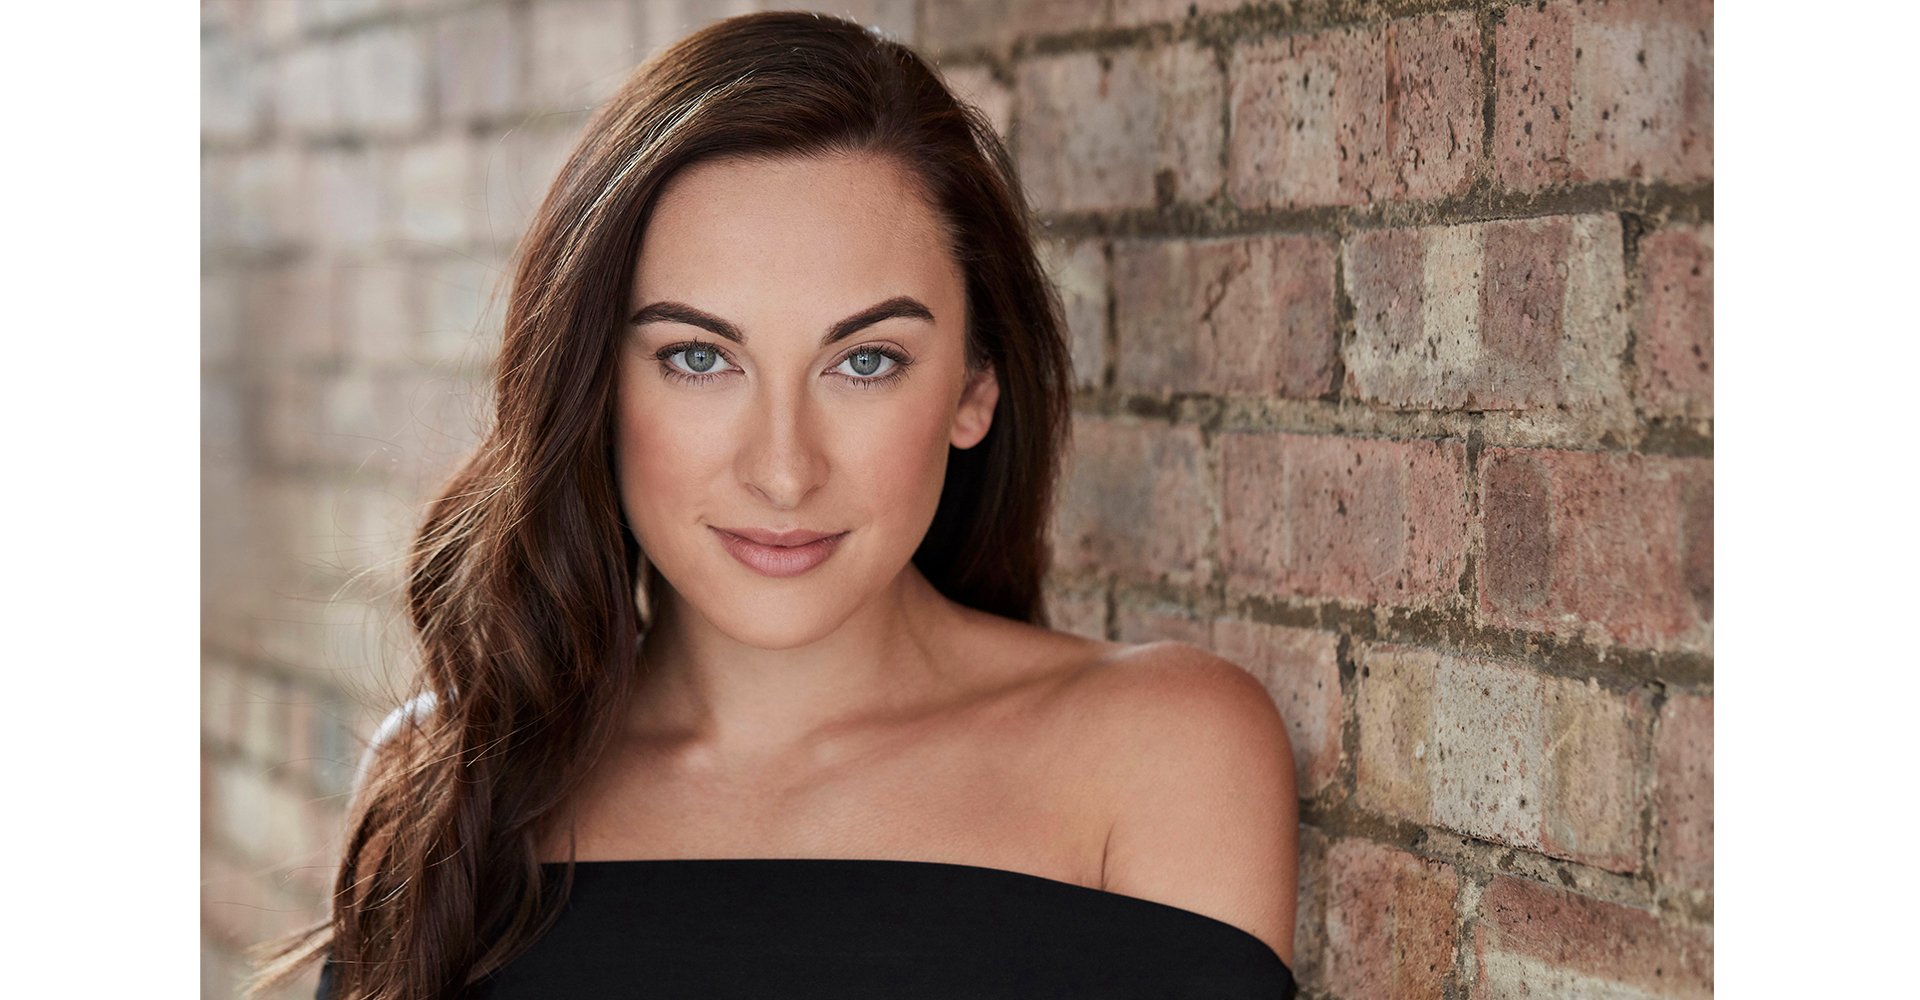 Actress dancer with brown hair headshot portrait standing front brick wall in natural light